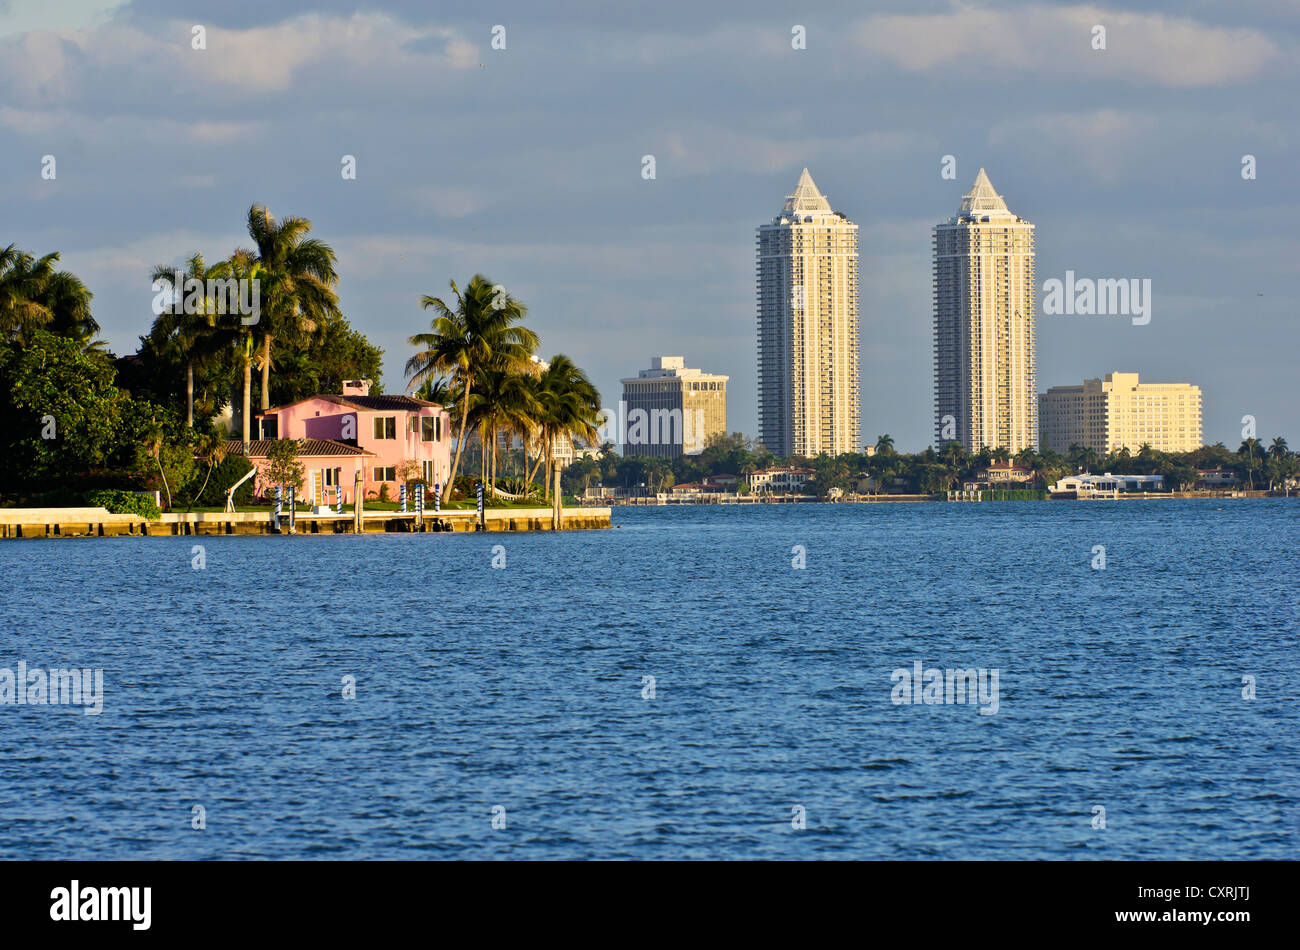 Housing complex at Mount Sinai Medical Center, seen from Morningside Park, Miami, Florida, USA Stock Photo